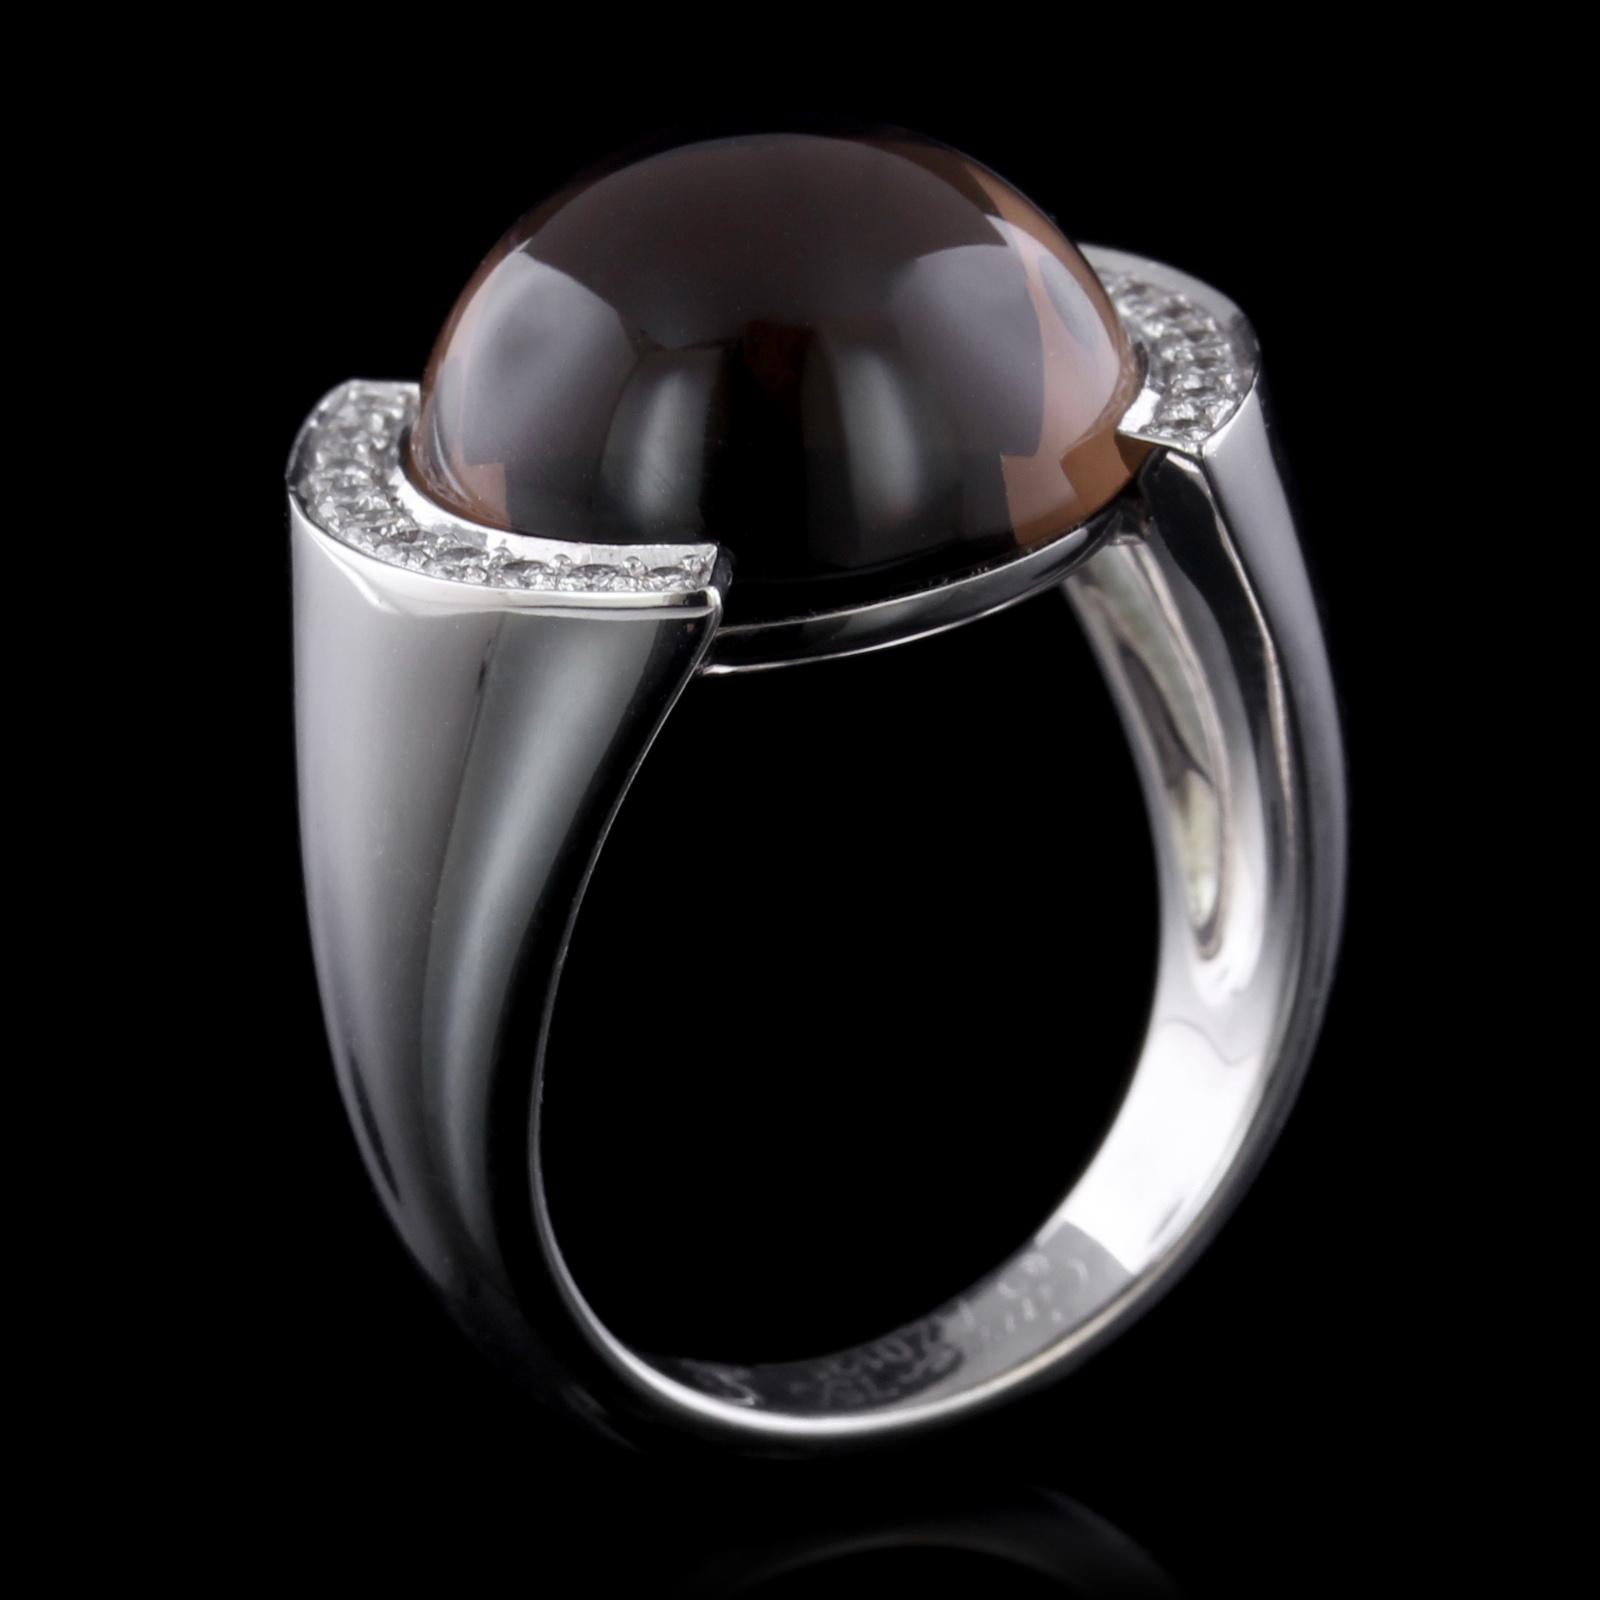 Cartier 18 Karat White Gold Smoky Quartz and Diamond Ring In Excellent Condition For Sale In Nashua, NH